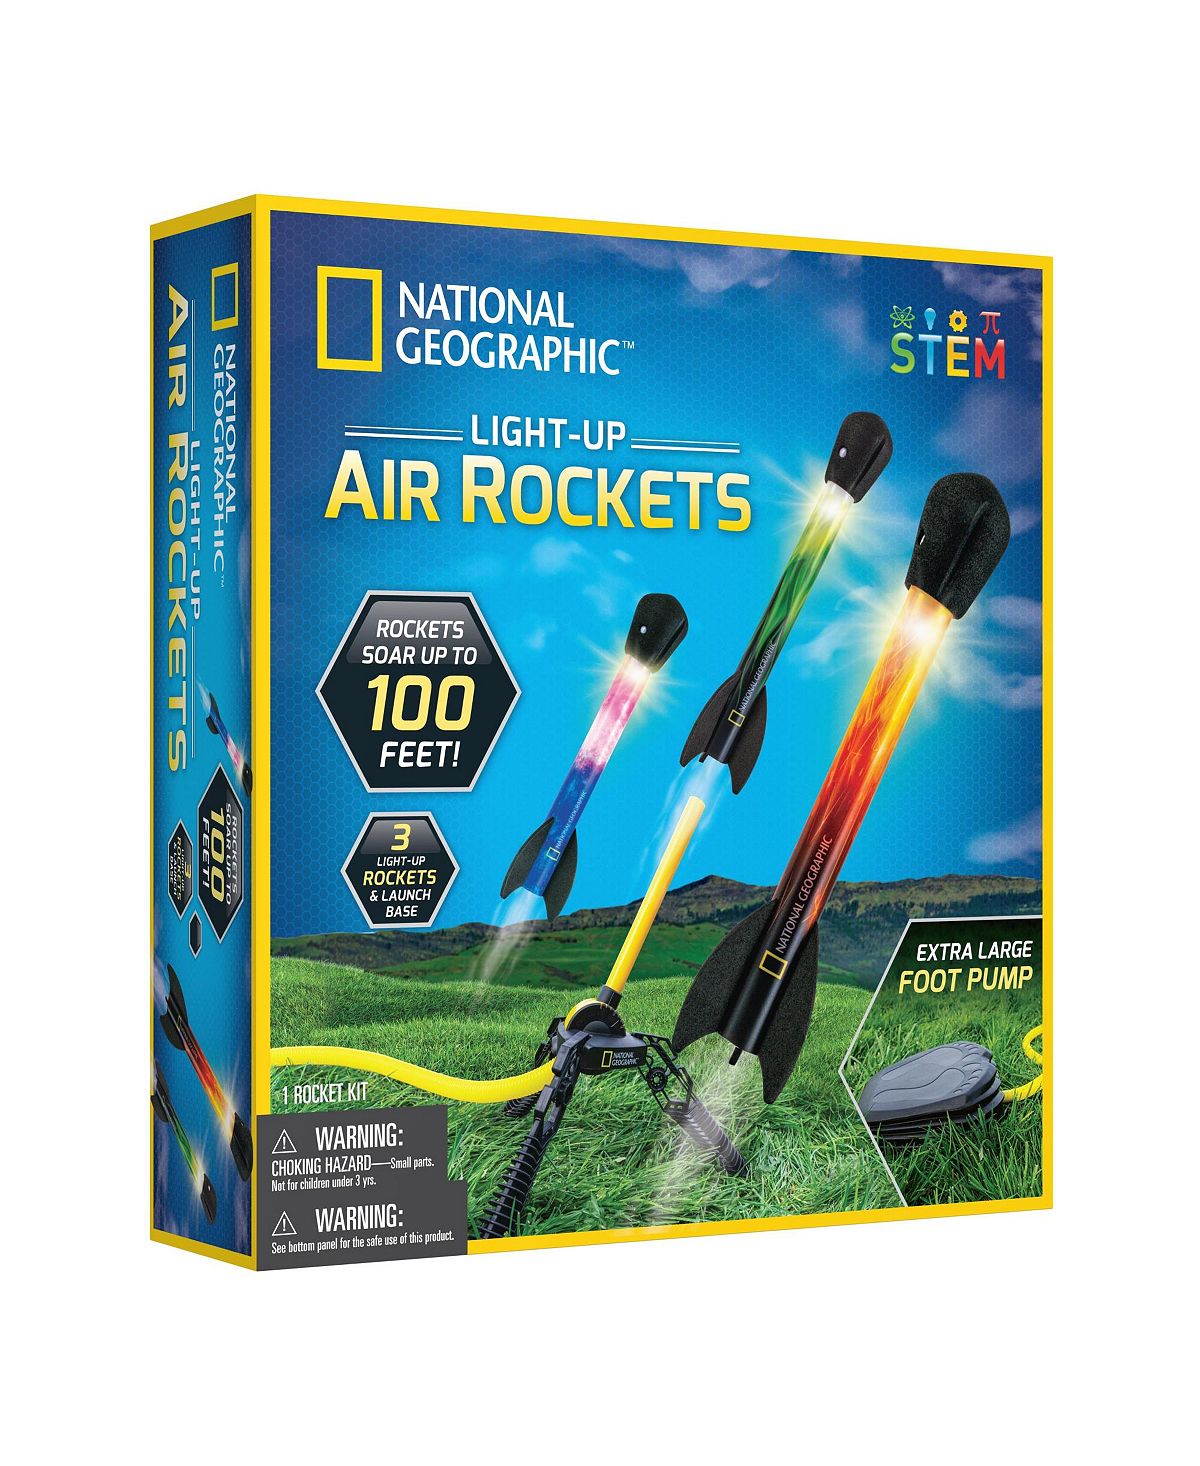 National Geographic Light-Up Air Rockets STEM Kit